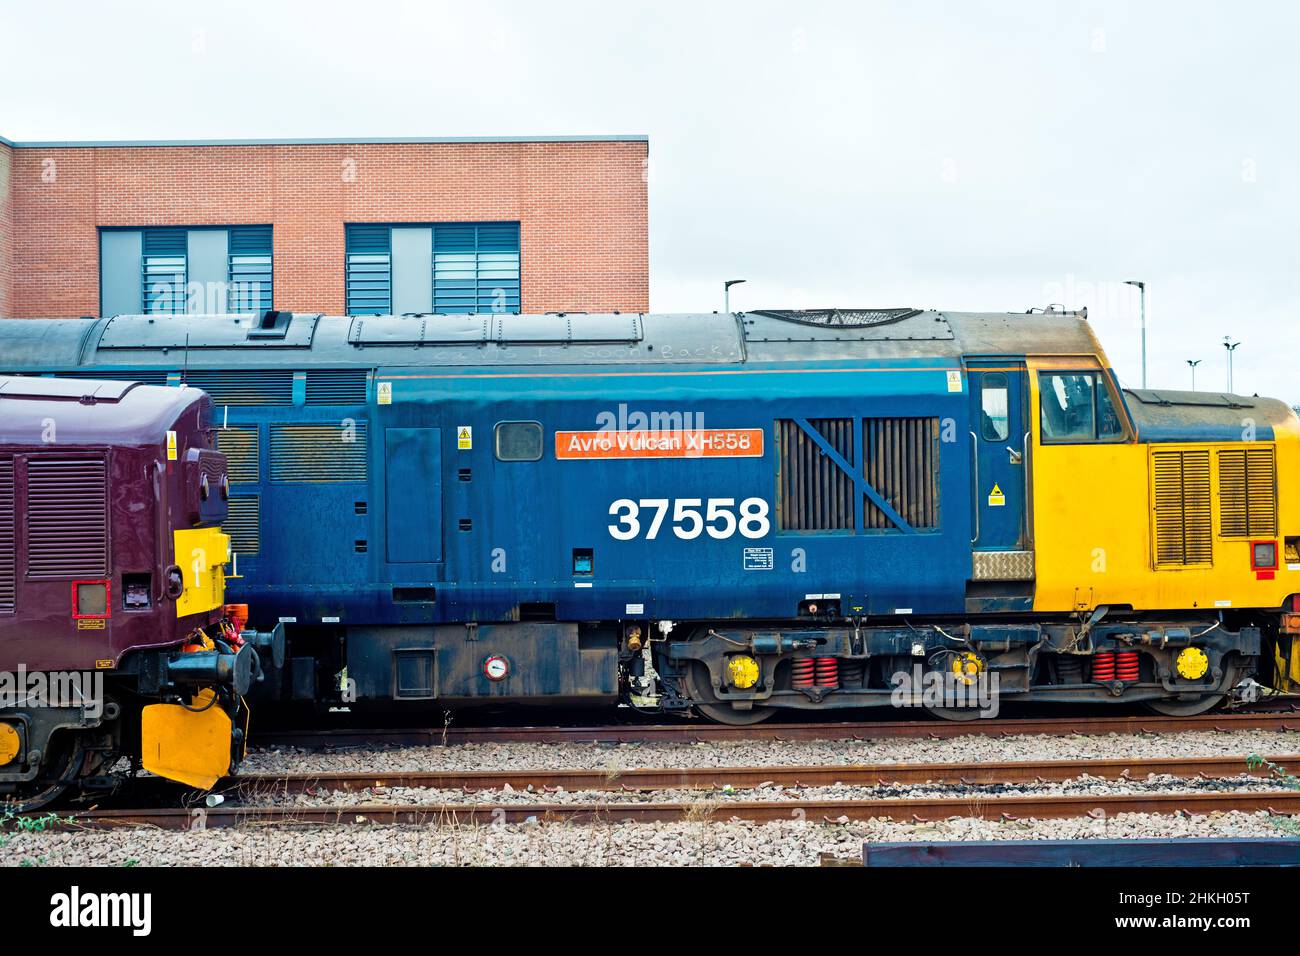 West Coast Class 37 and large Log BR Class 37 No 37558 Avro Vullcan XH 558 stabled at York Railway Station, England Stock Photo